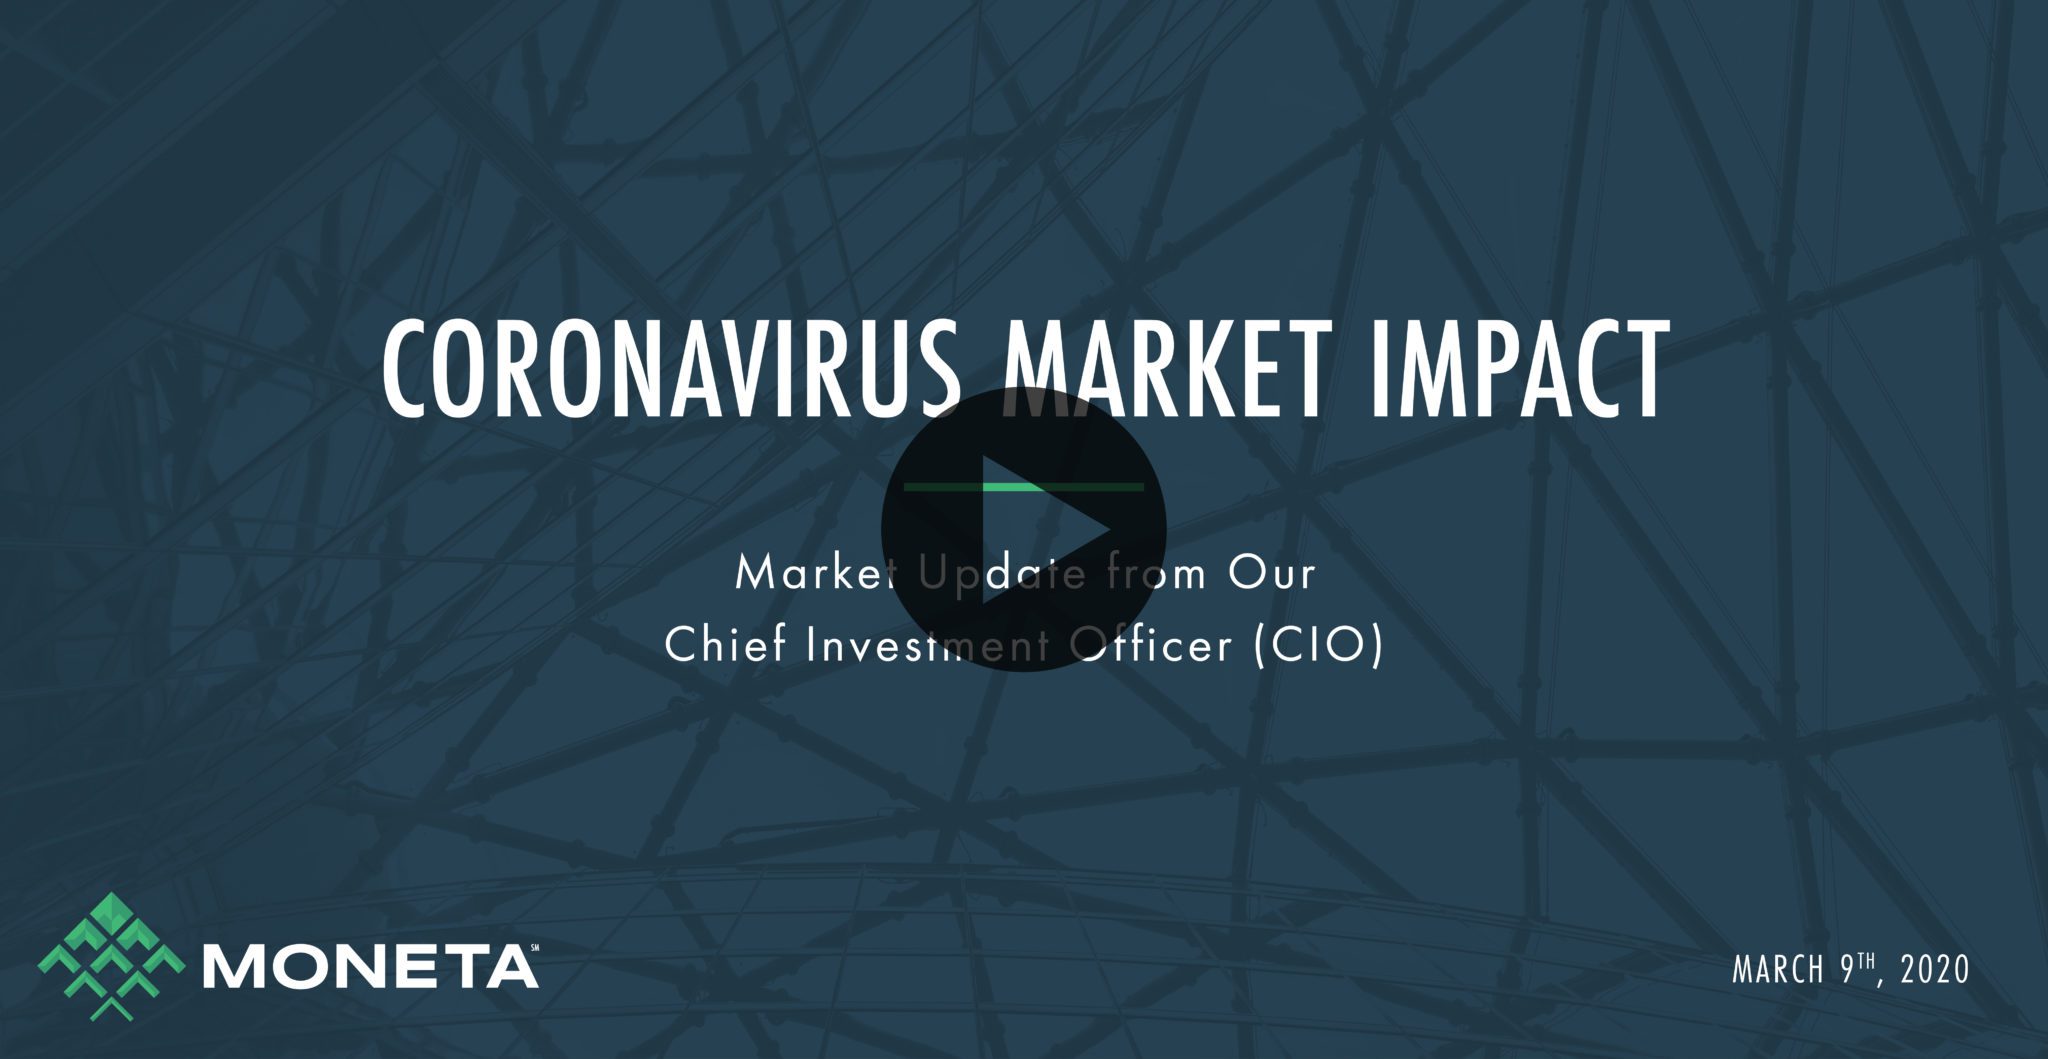 What is going on with the coronavirus and stock market volatility?